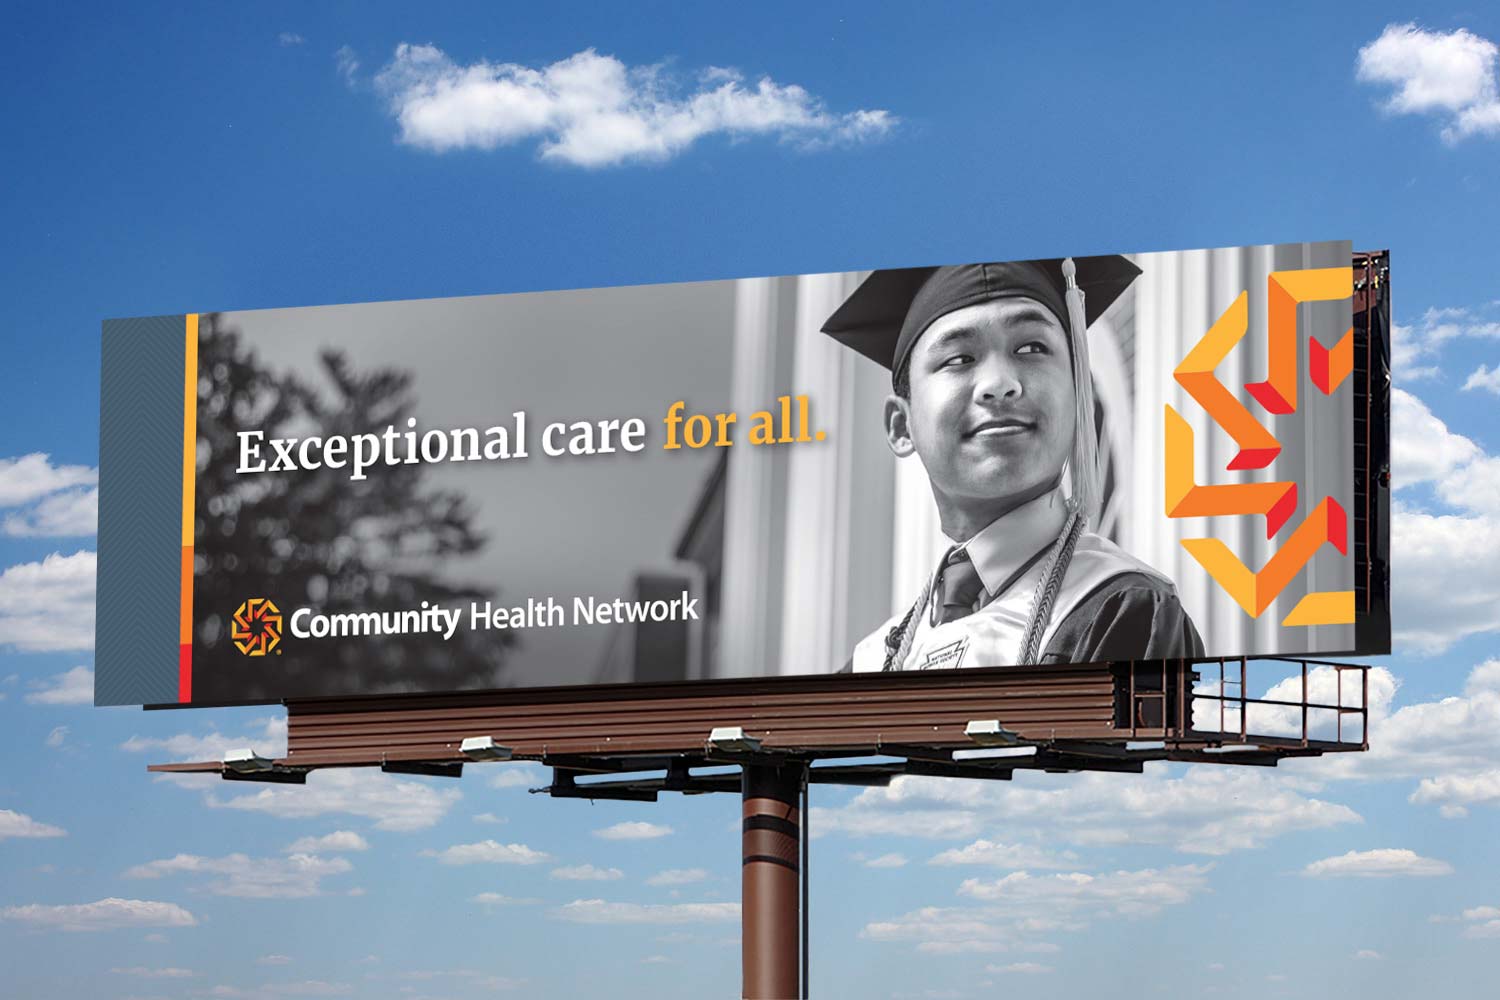 Community Health Network Social Responsibility Campaign - Ad 2